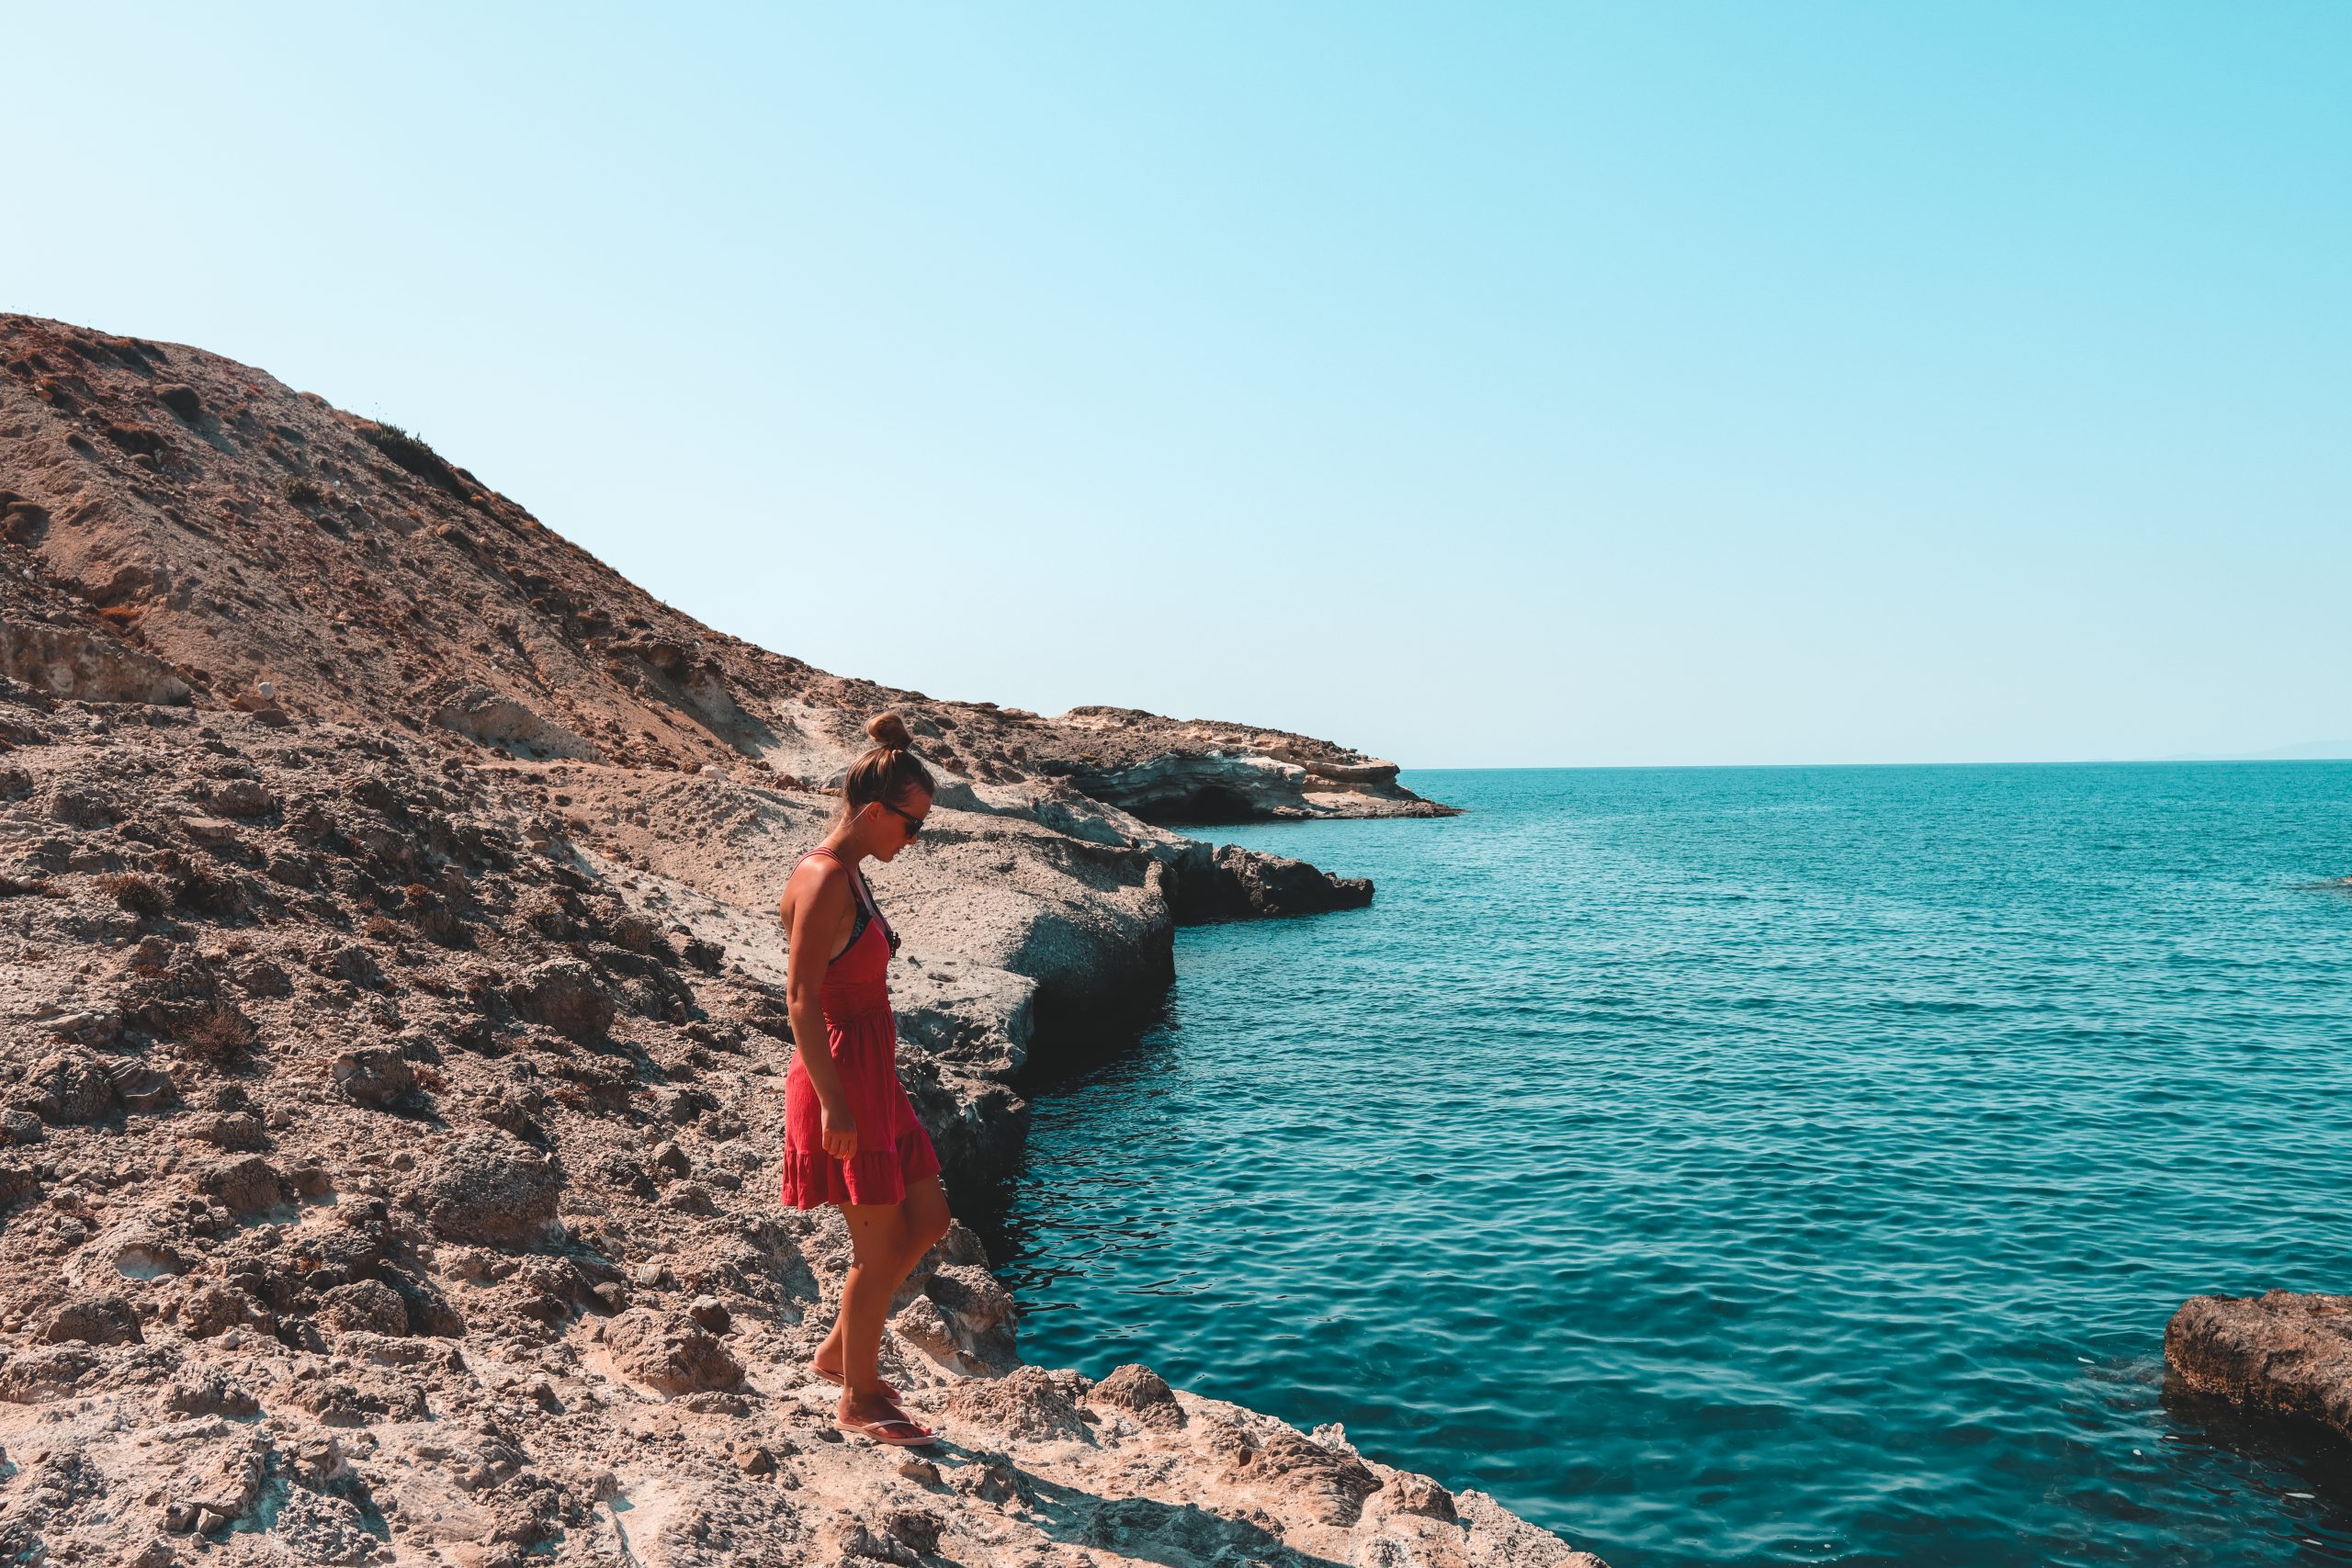 A woman stood next to the turquoise sea at Kapros beach in Milos